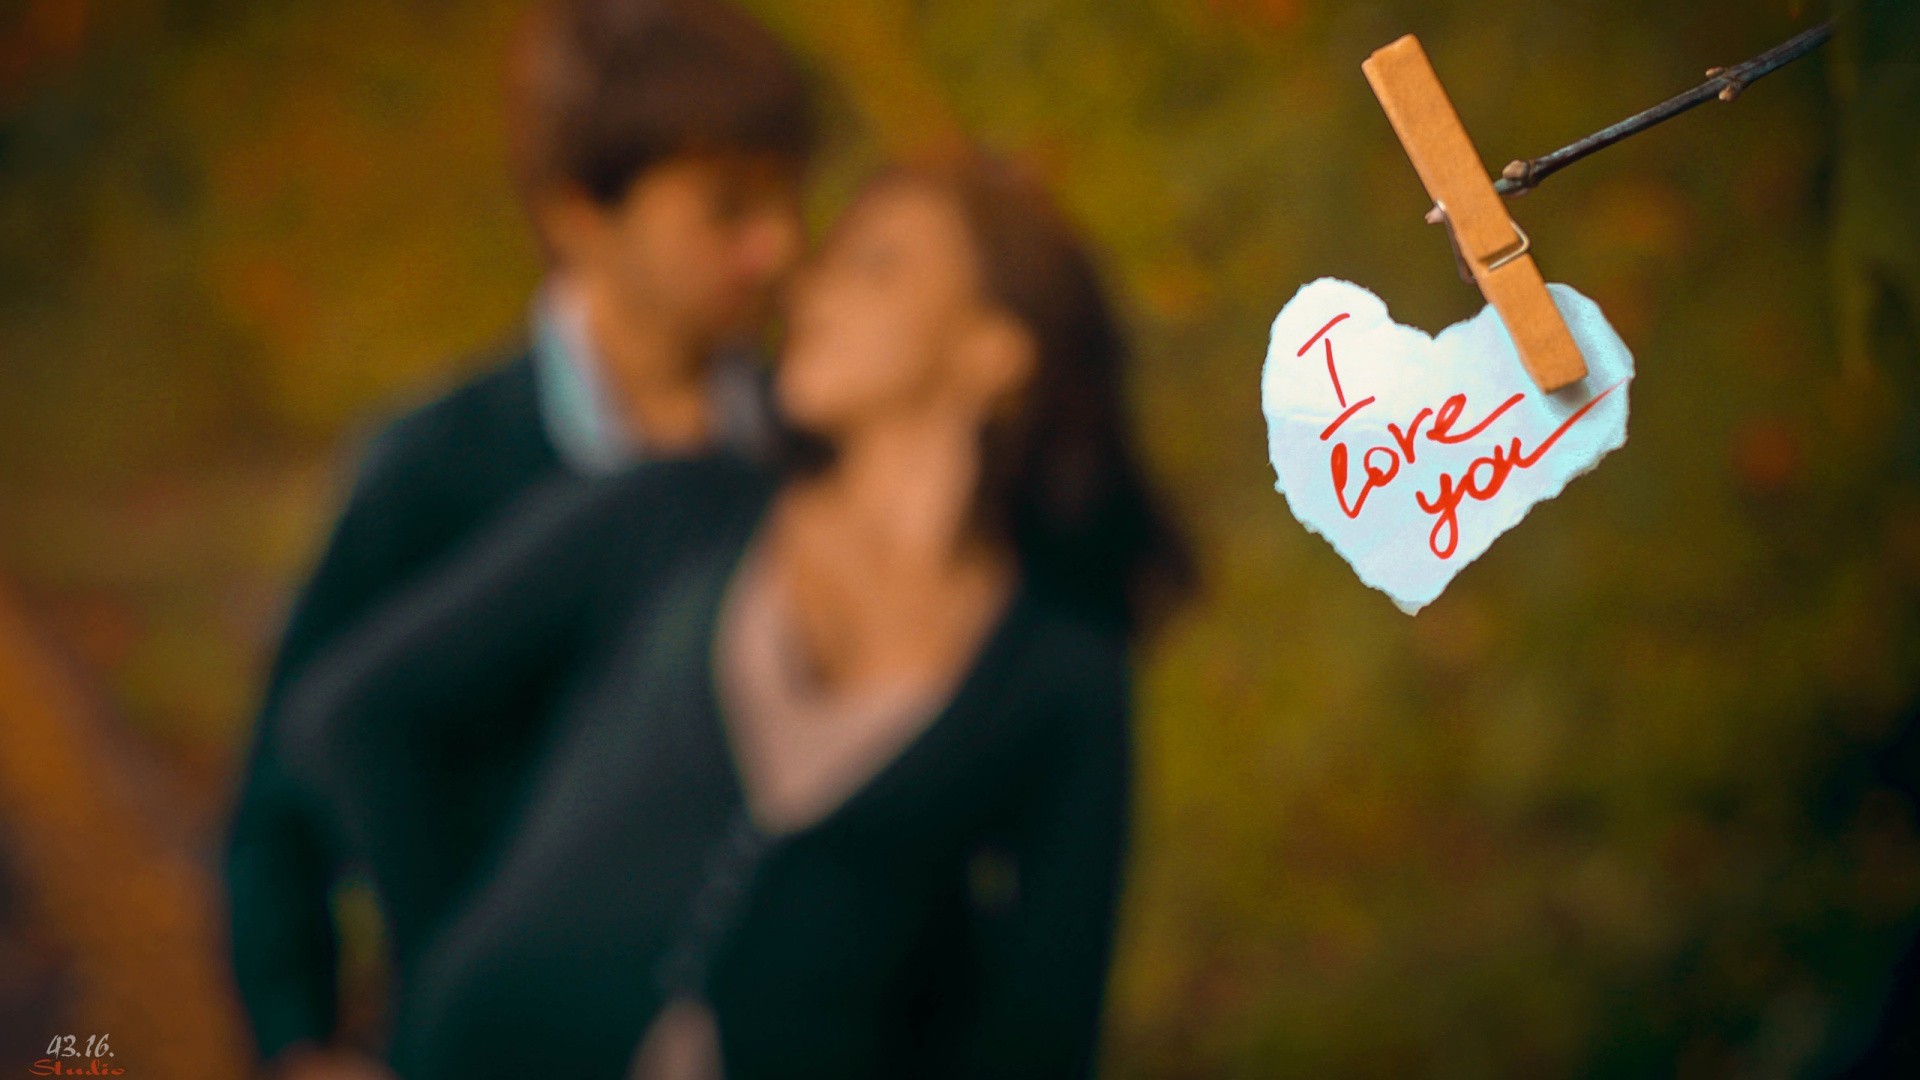 Romantic Couple Wallpapers For Facebook Cover - 1920x1080 Wallpaper -  